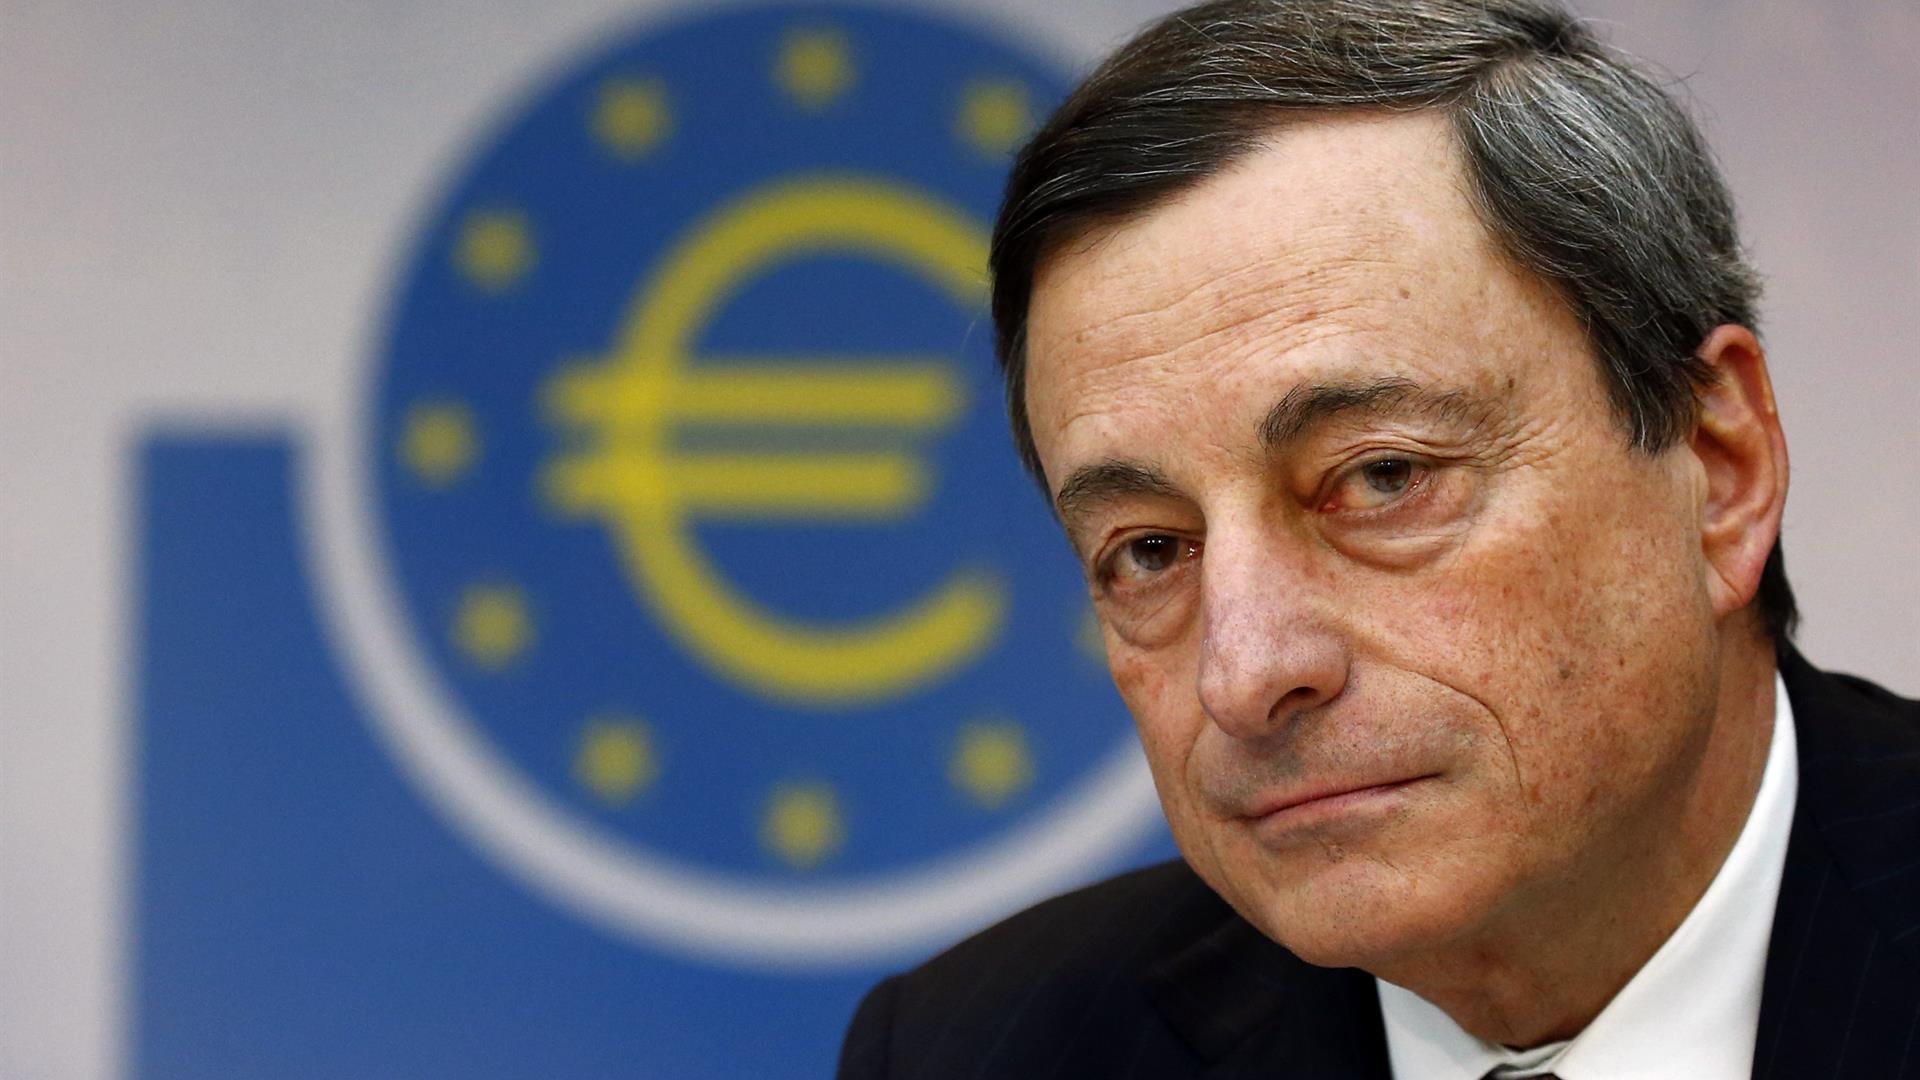 Draghi Says Pay Gains to Ease ECB Pressure as Labor Tightens